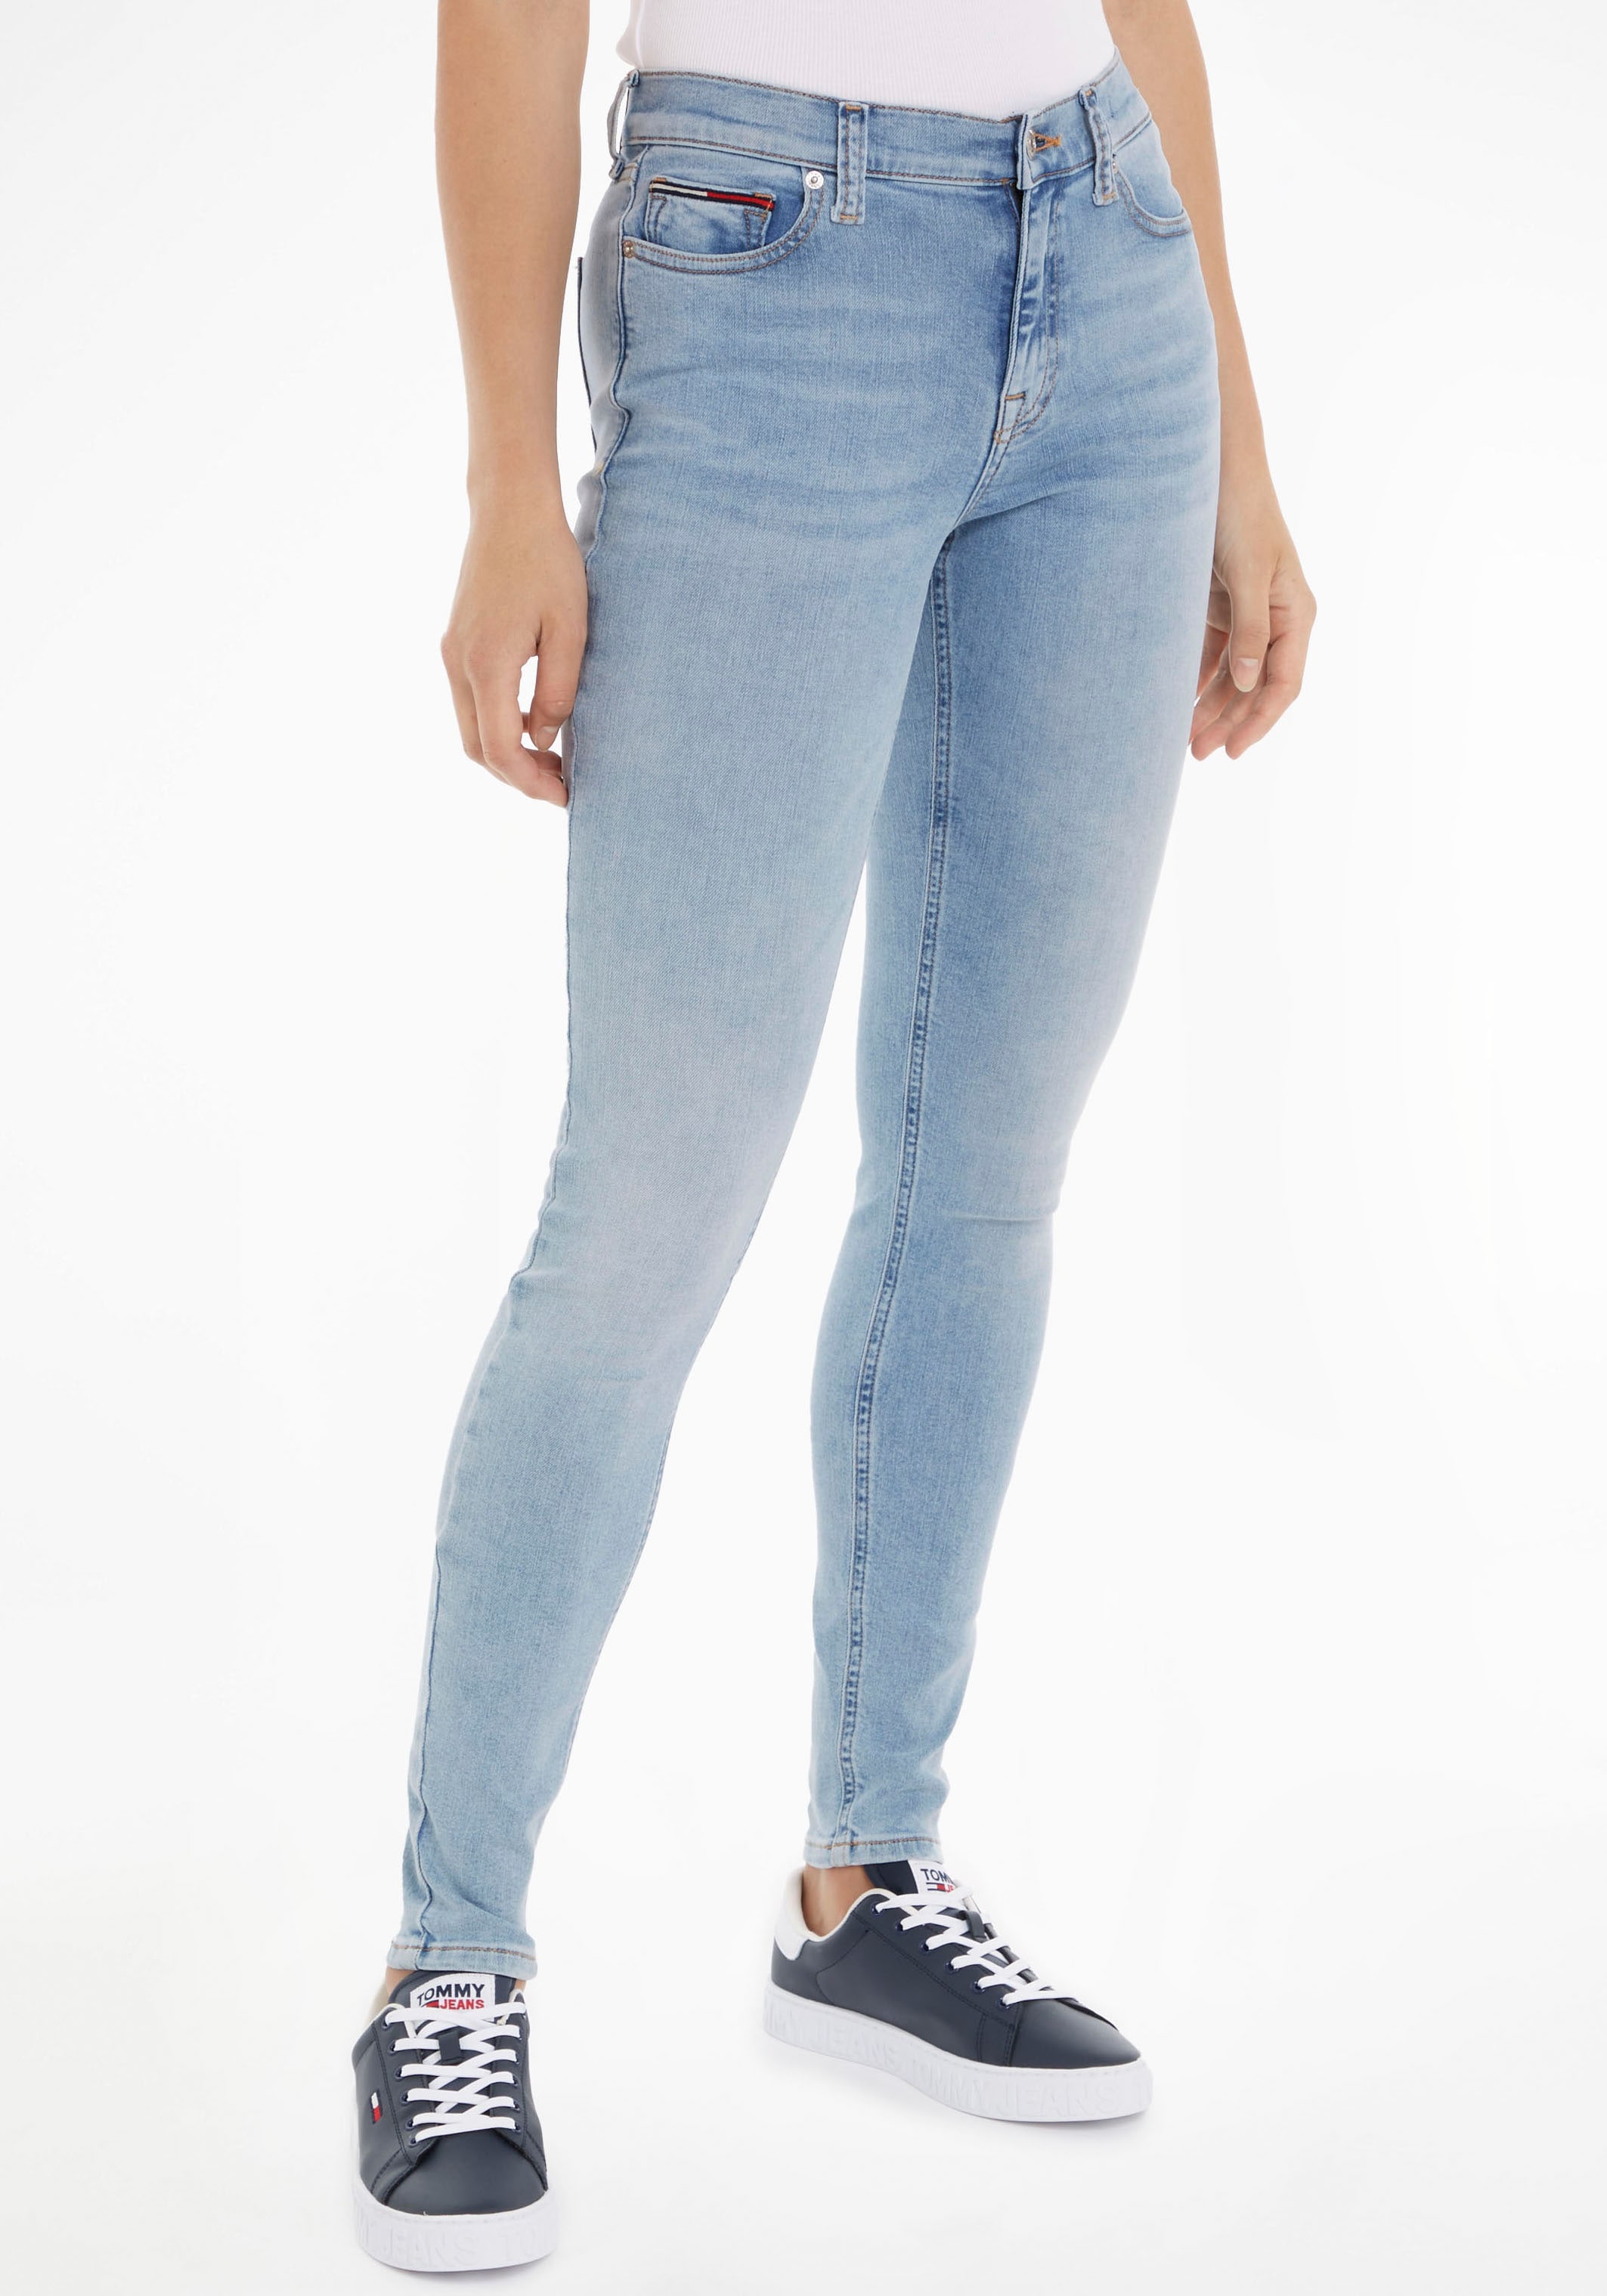 & im Tommy Shop hinten OTTO »Nora«, Jeans Skinny-fit-Jeans Jeans Online Passe mit Label-Badge Tommy